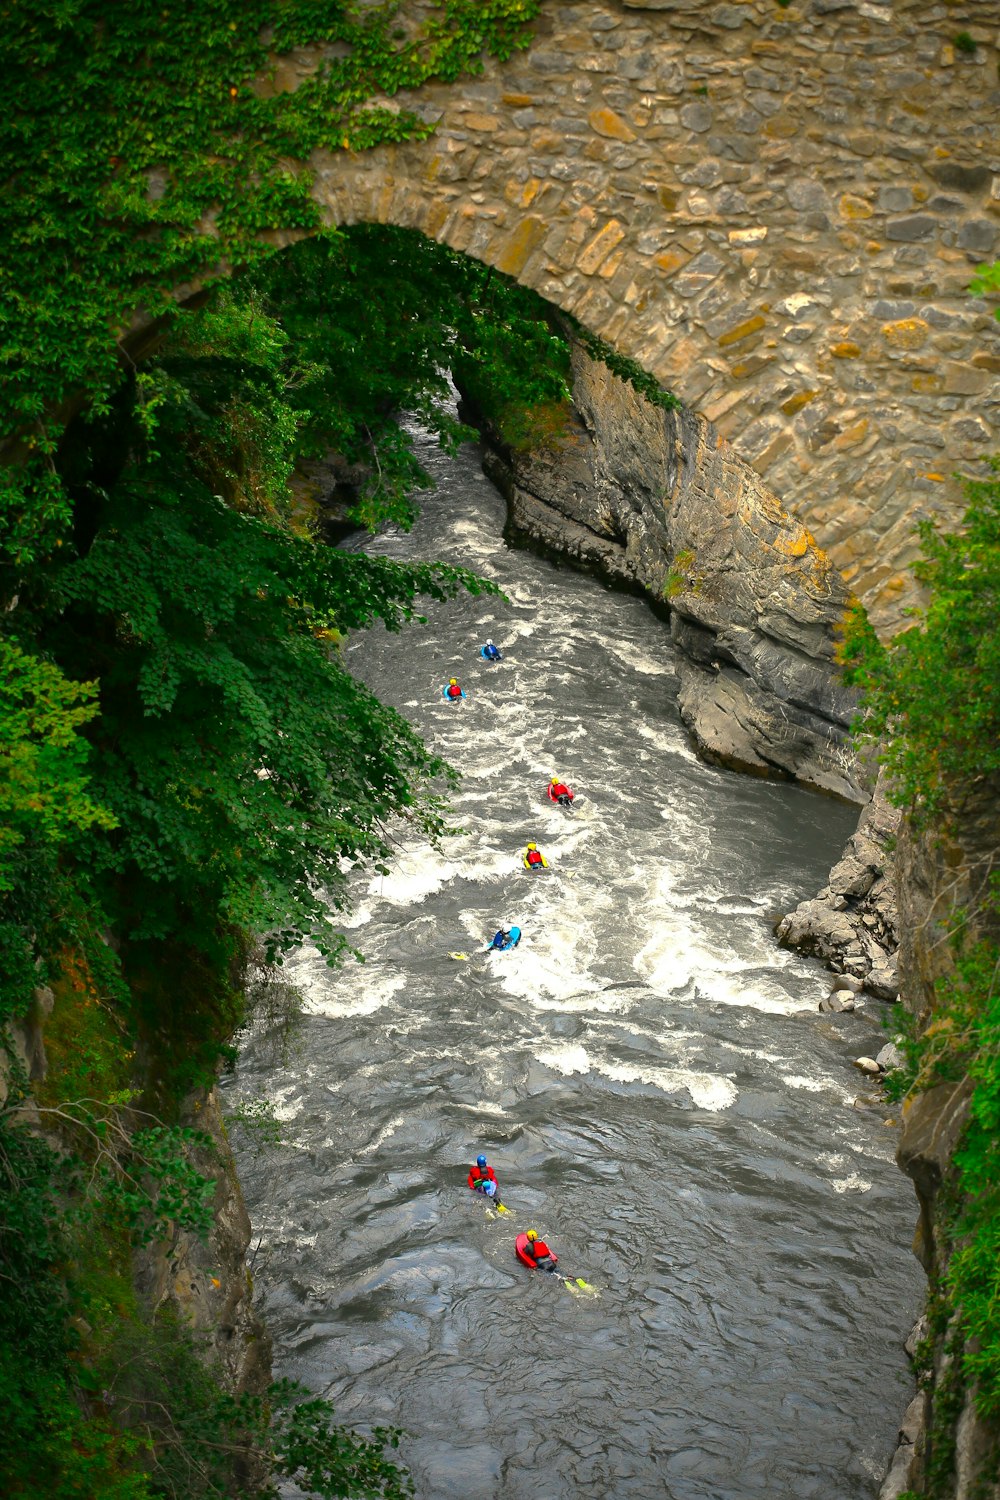 a group of people in rafts floating down a river